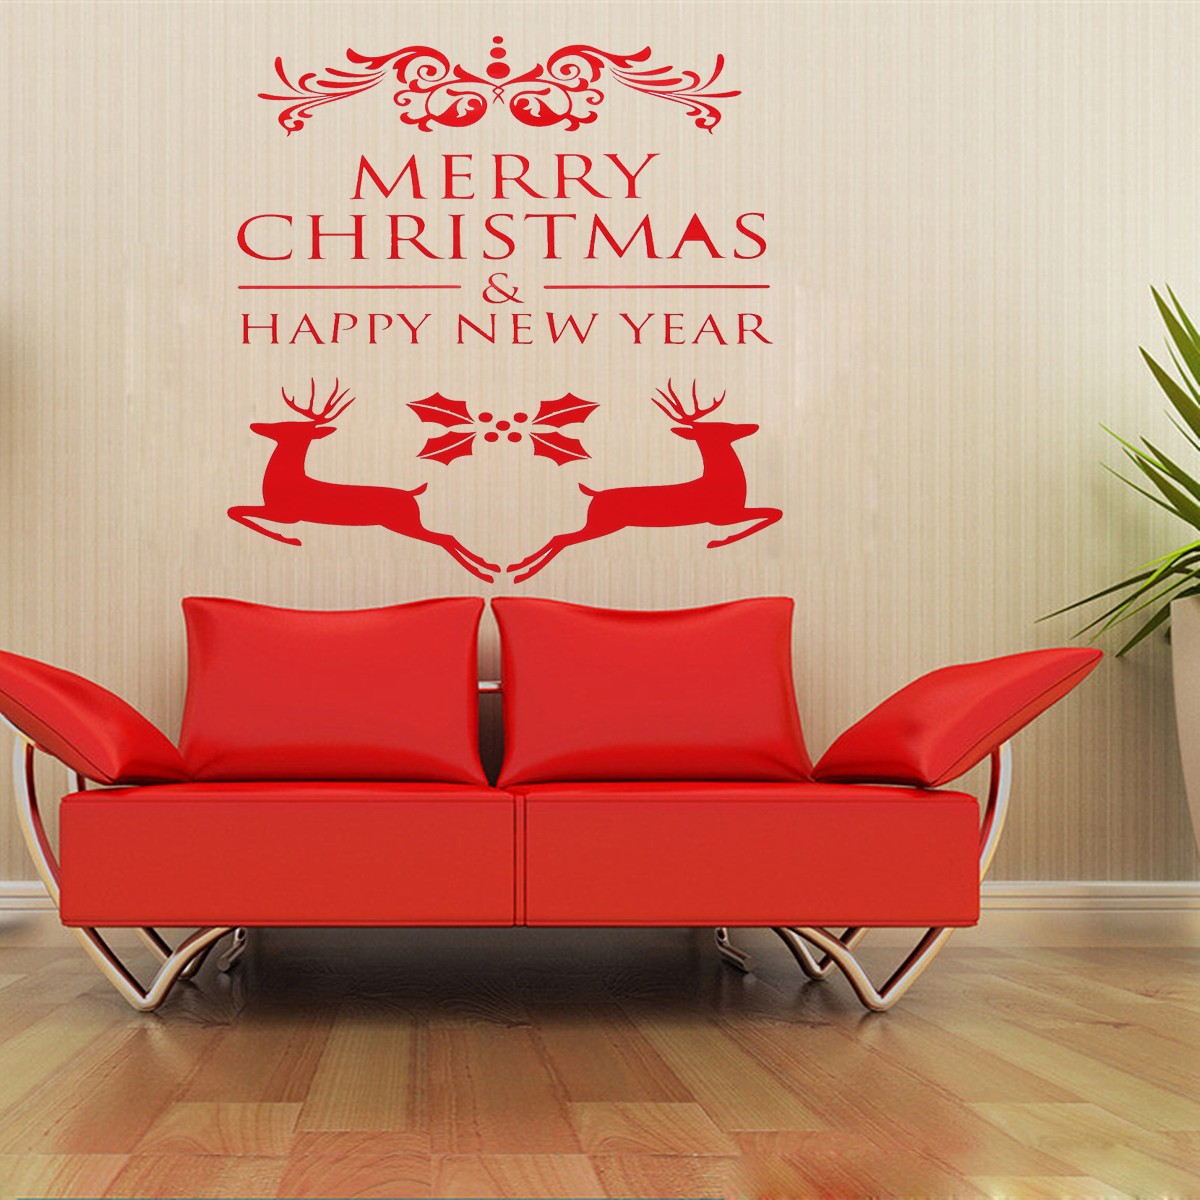 Merry Christmas Elk Wall Window Sticker Removable Christmas Wall Sticker Home Decoration